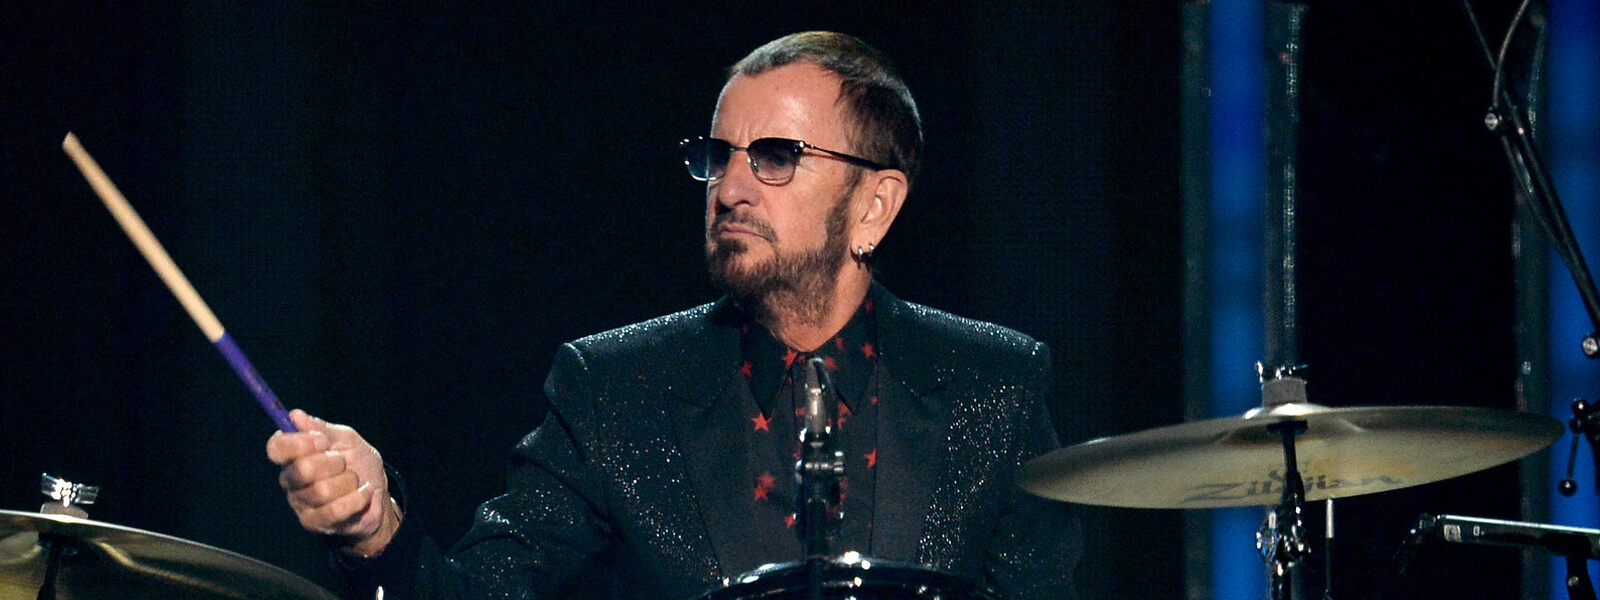 In interview Ringo Starr talks about Tom Petty’s death (1)